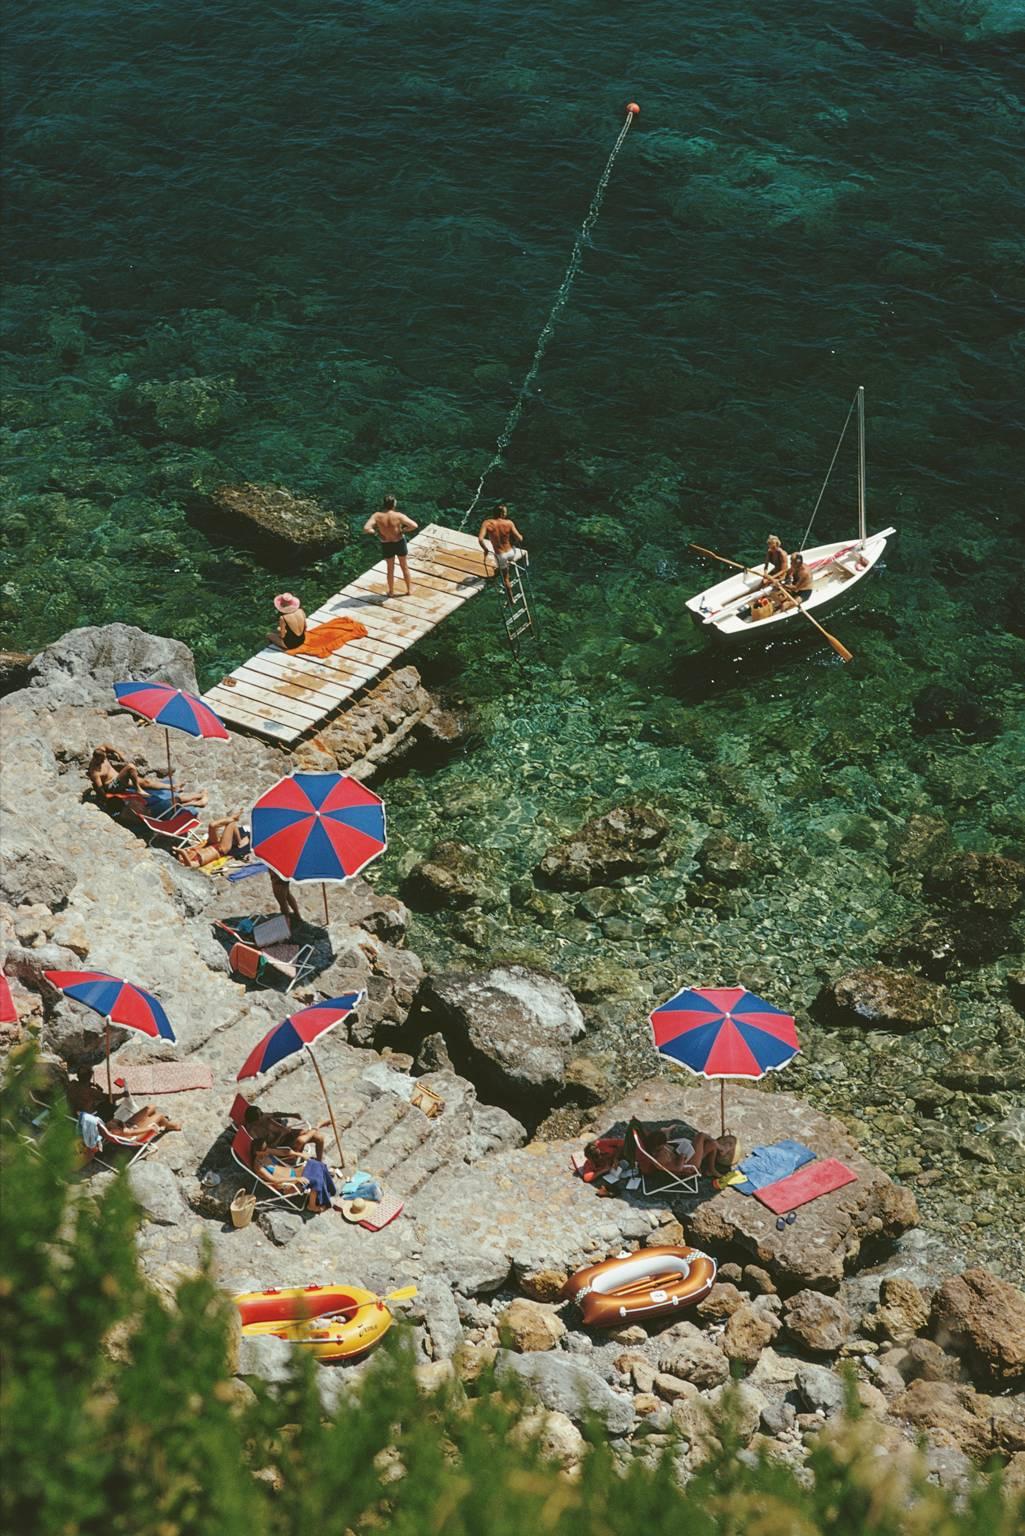 'Porto Ercole' by Slim Aarons

A jetty juts out from the rocky shoreline at the Hotel Il Pellicano in Porto Ercole, Tuscany, August 1973.

Beautiful greens of the sea water contrast with the red and blue parasols, gorgeous light, you can almost feel